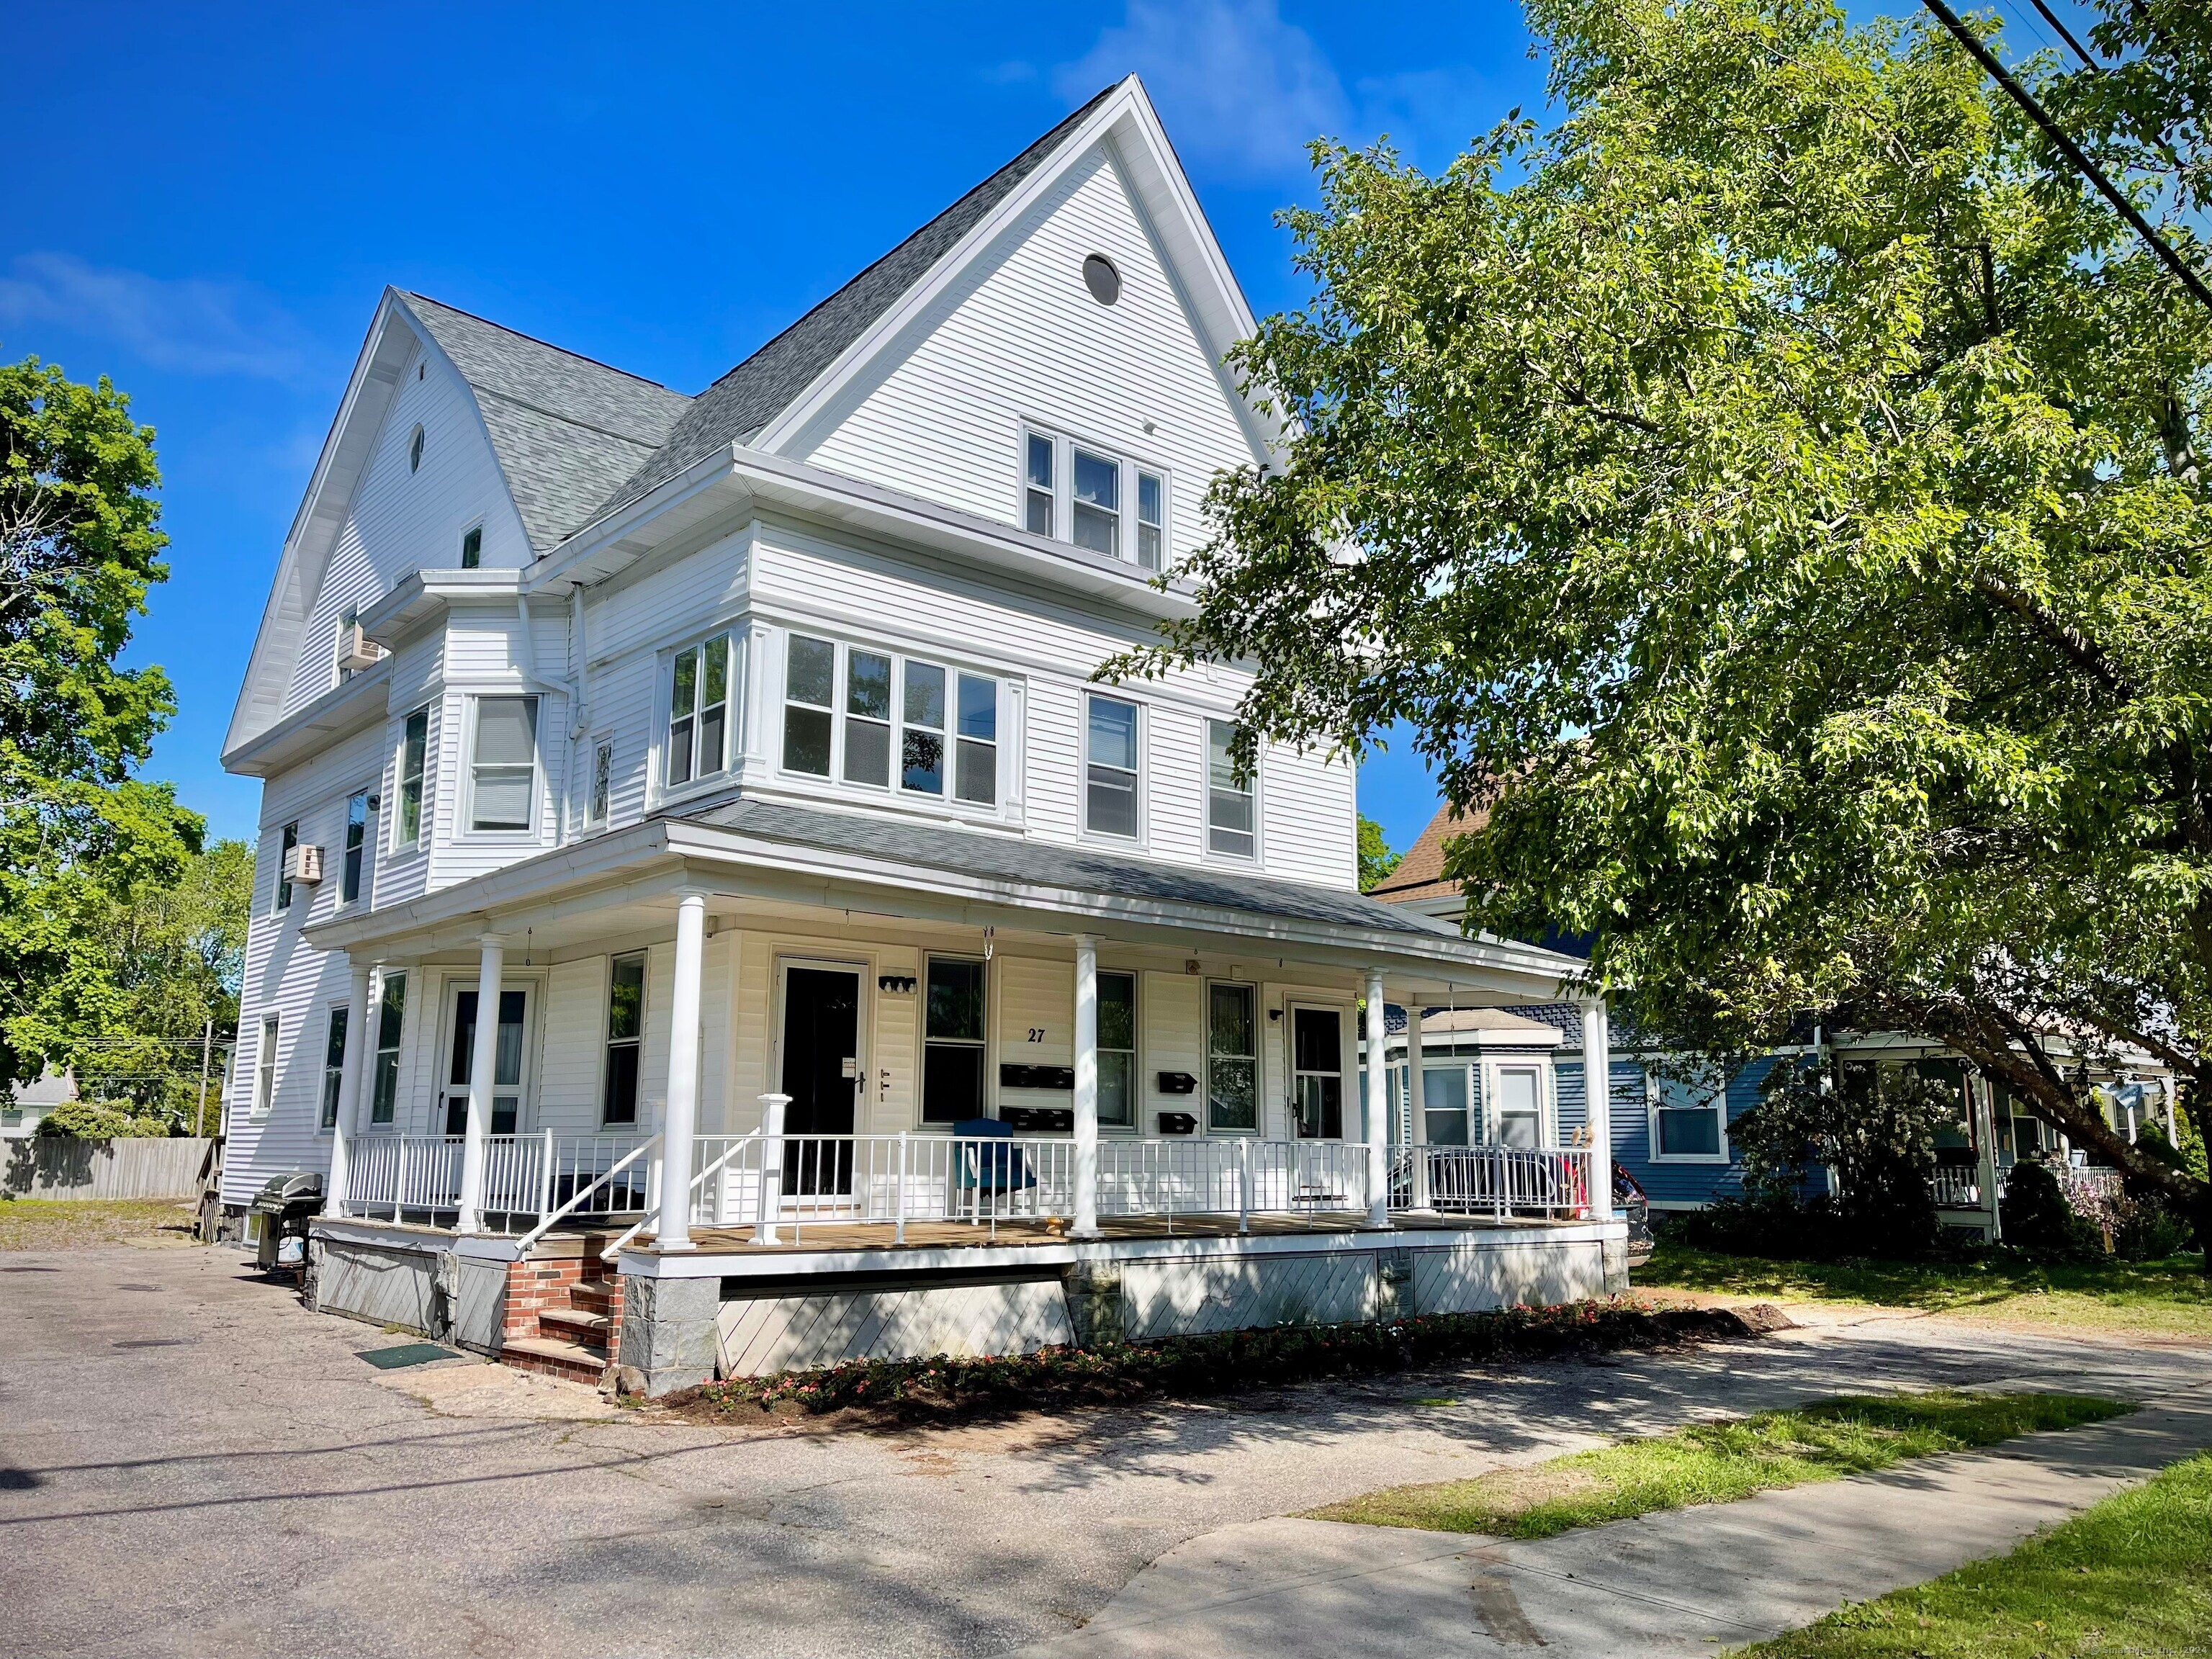 27 Moss Street, Pawcatuck CT 06379; A 6-unit multifamily building with 7.794% Cap rate in the high demand Town of Stonington, Connecticut